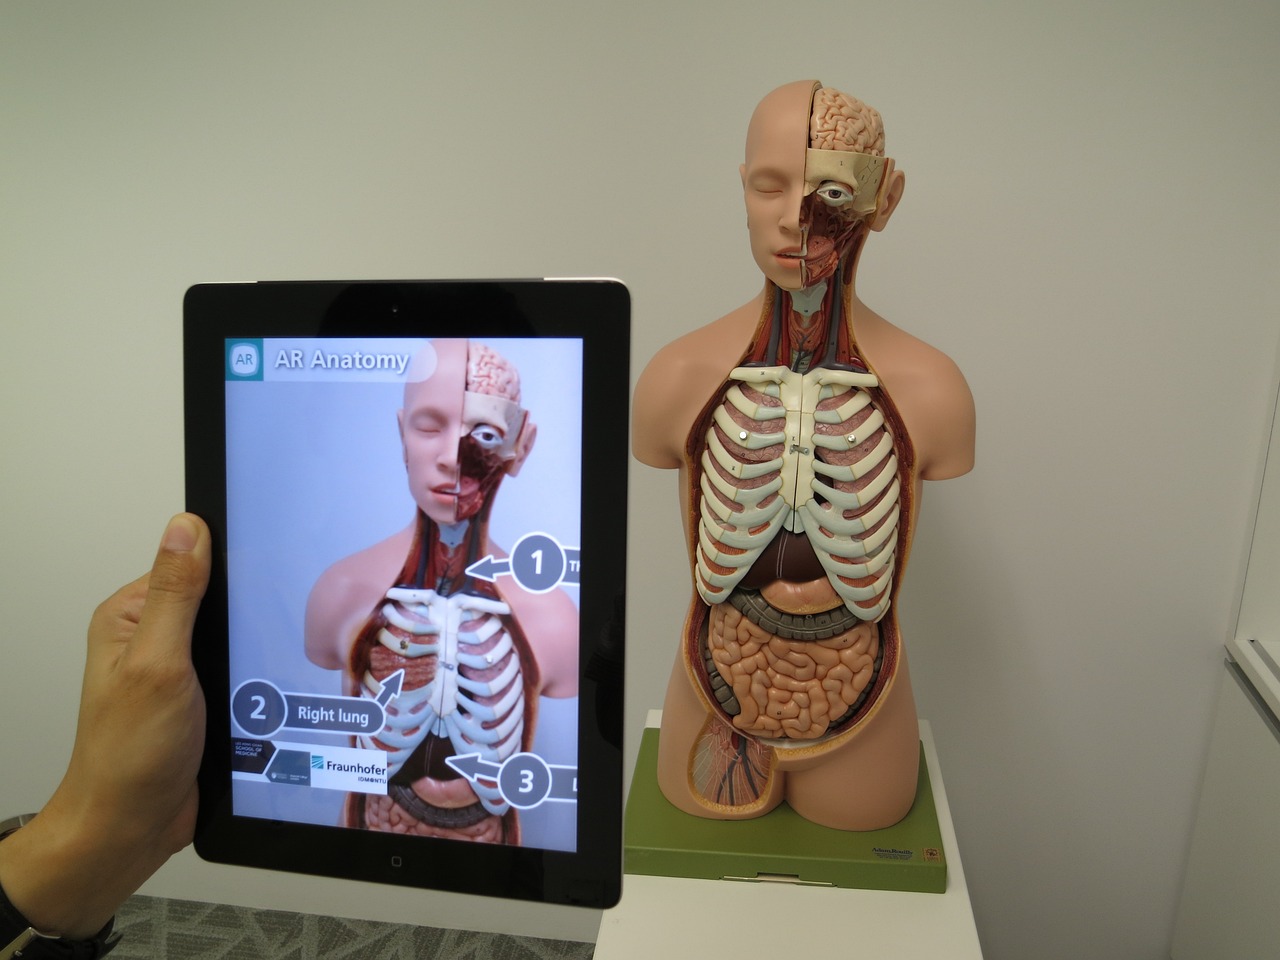 AR use in healthcare